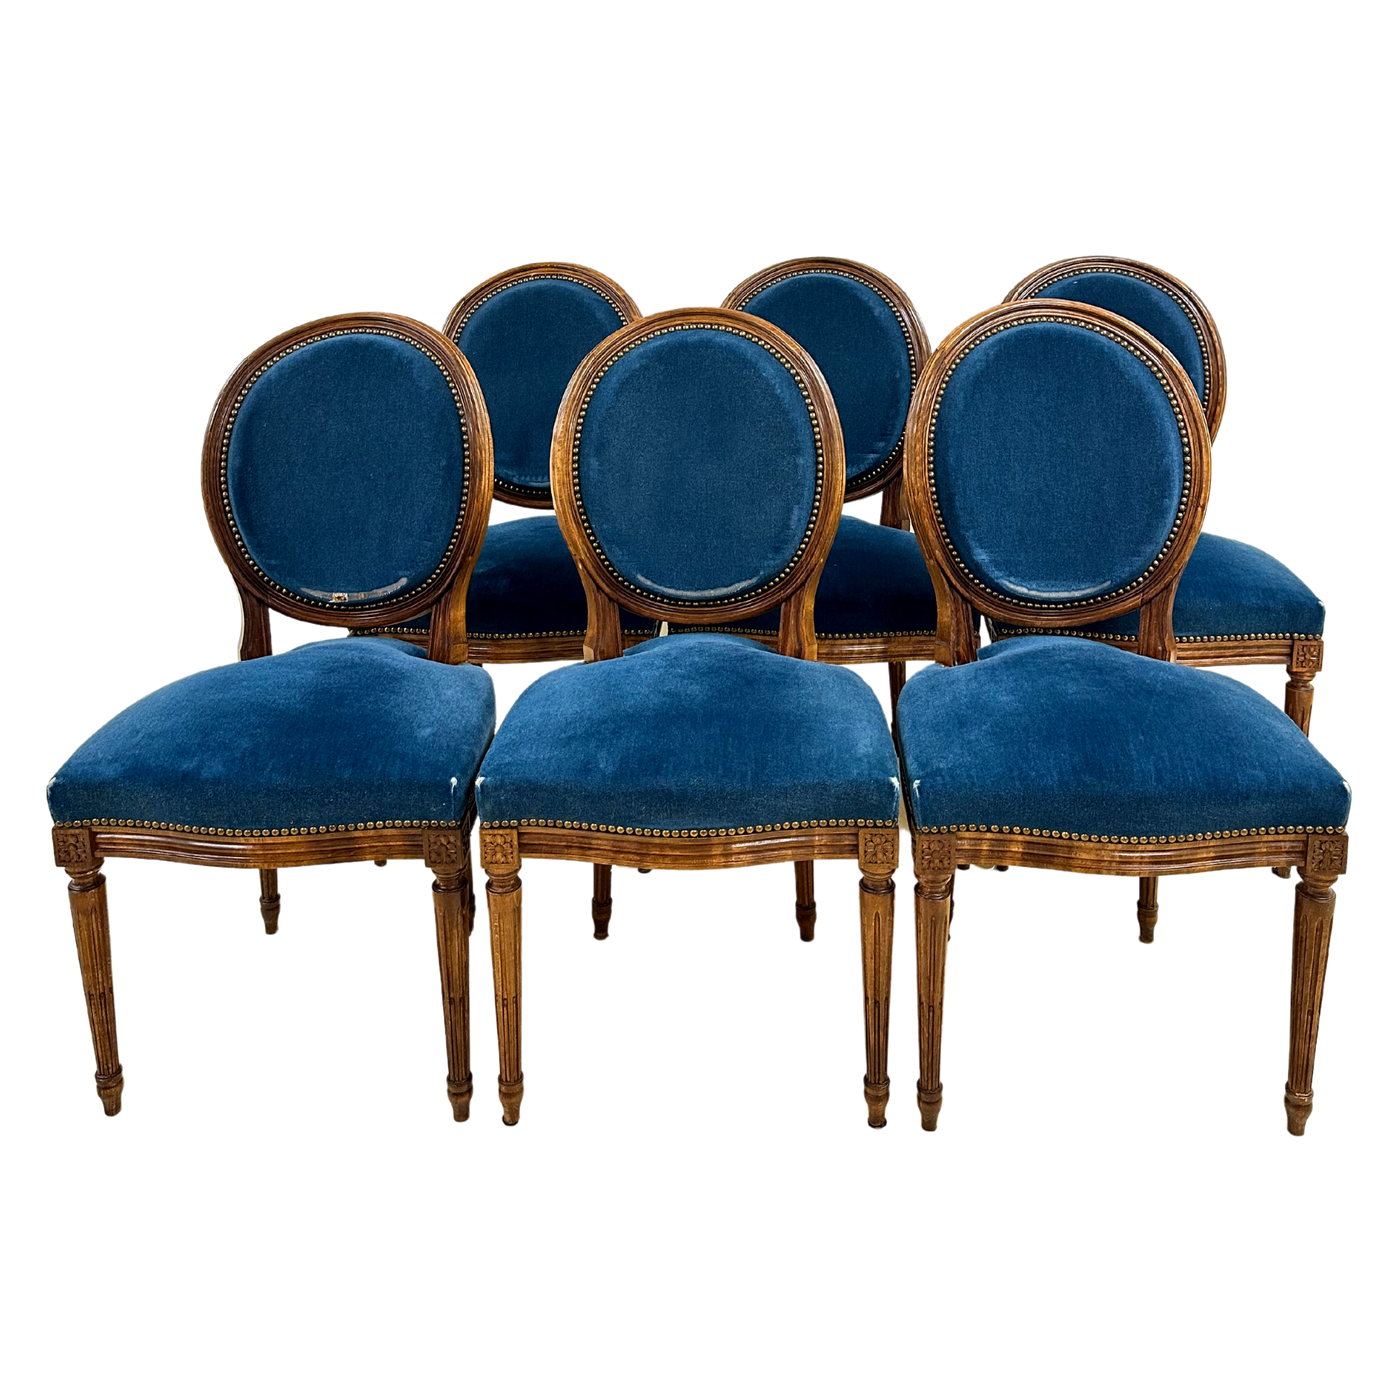 Early 20th c. Louis XVI Style Chairs, Set of 6